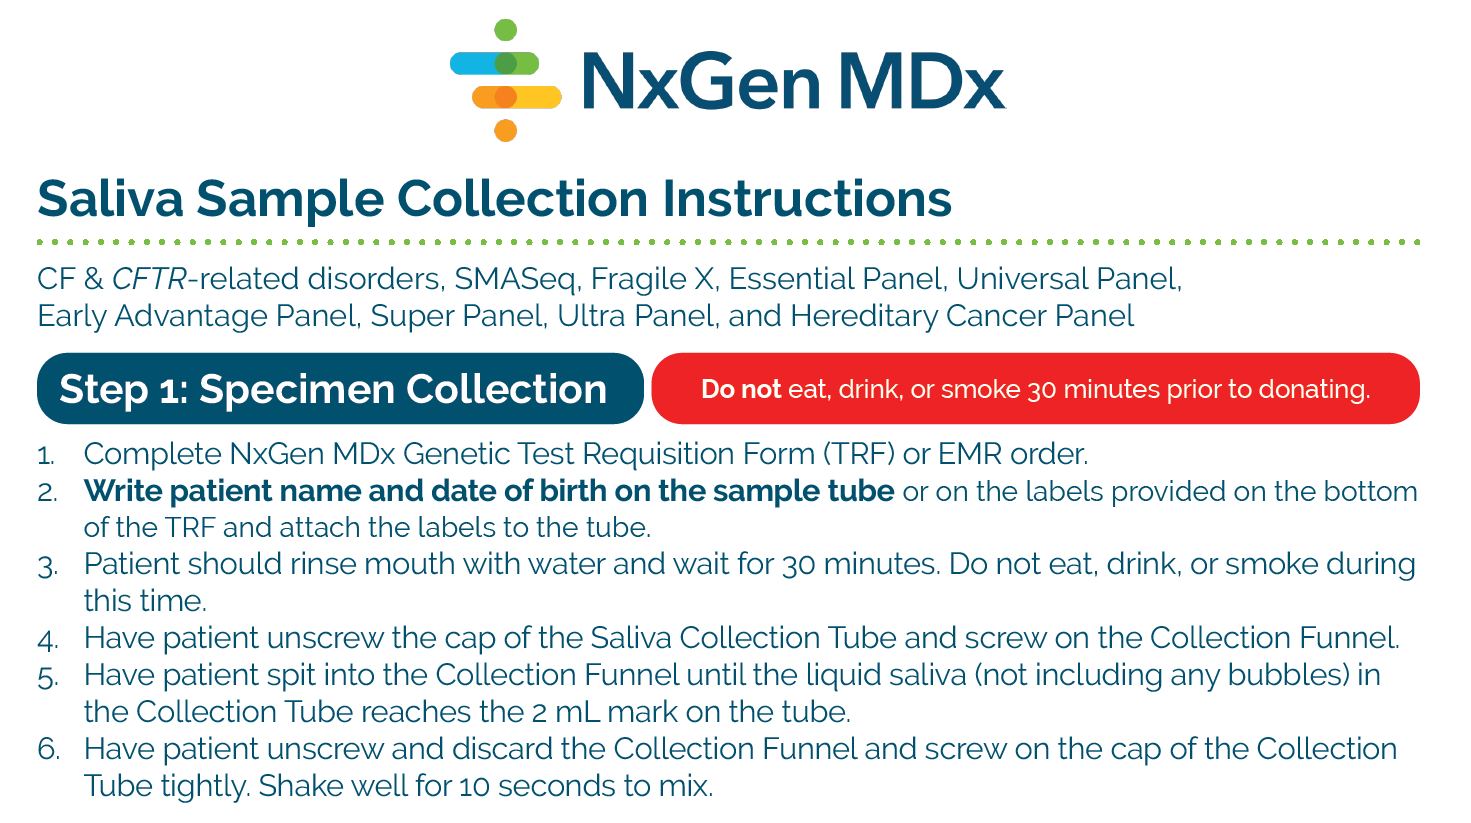 Link to Saliva Sample Collection Instructions PDF